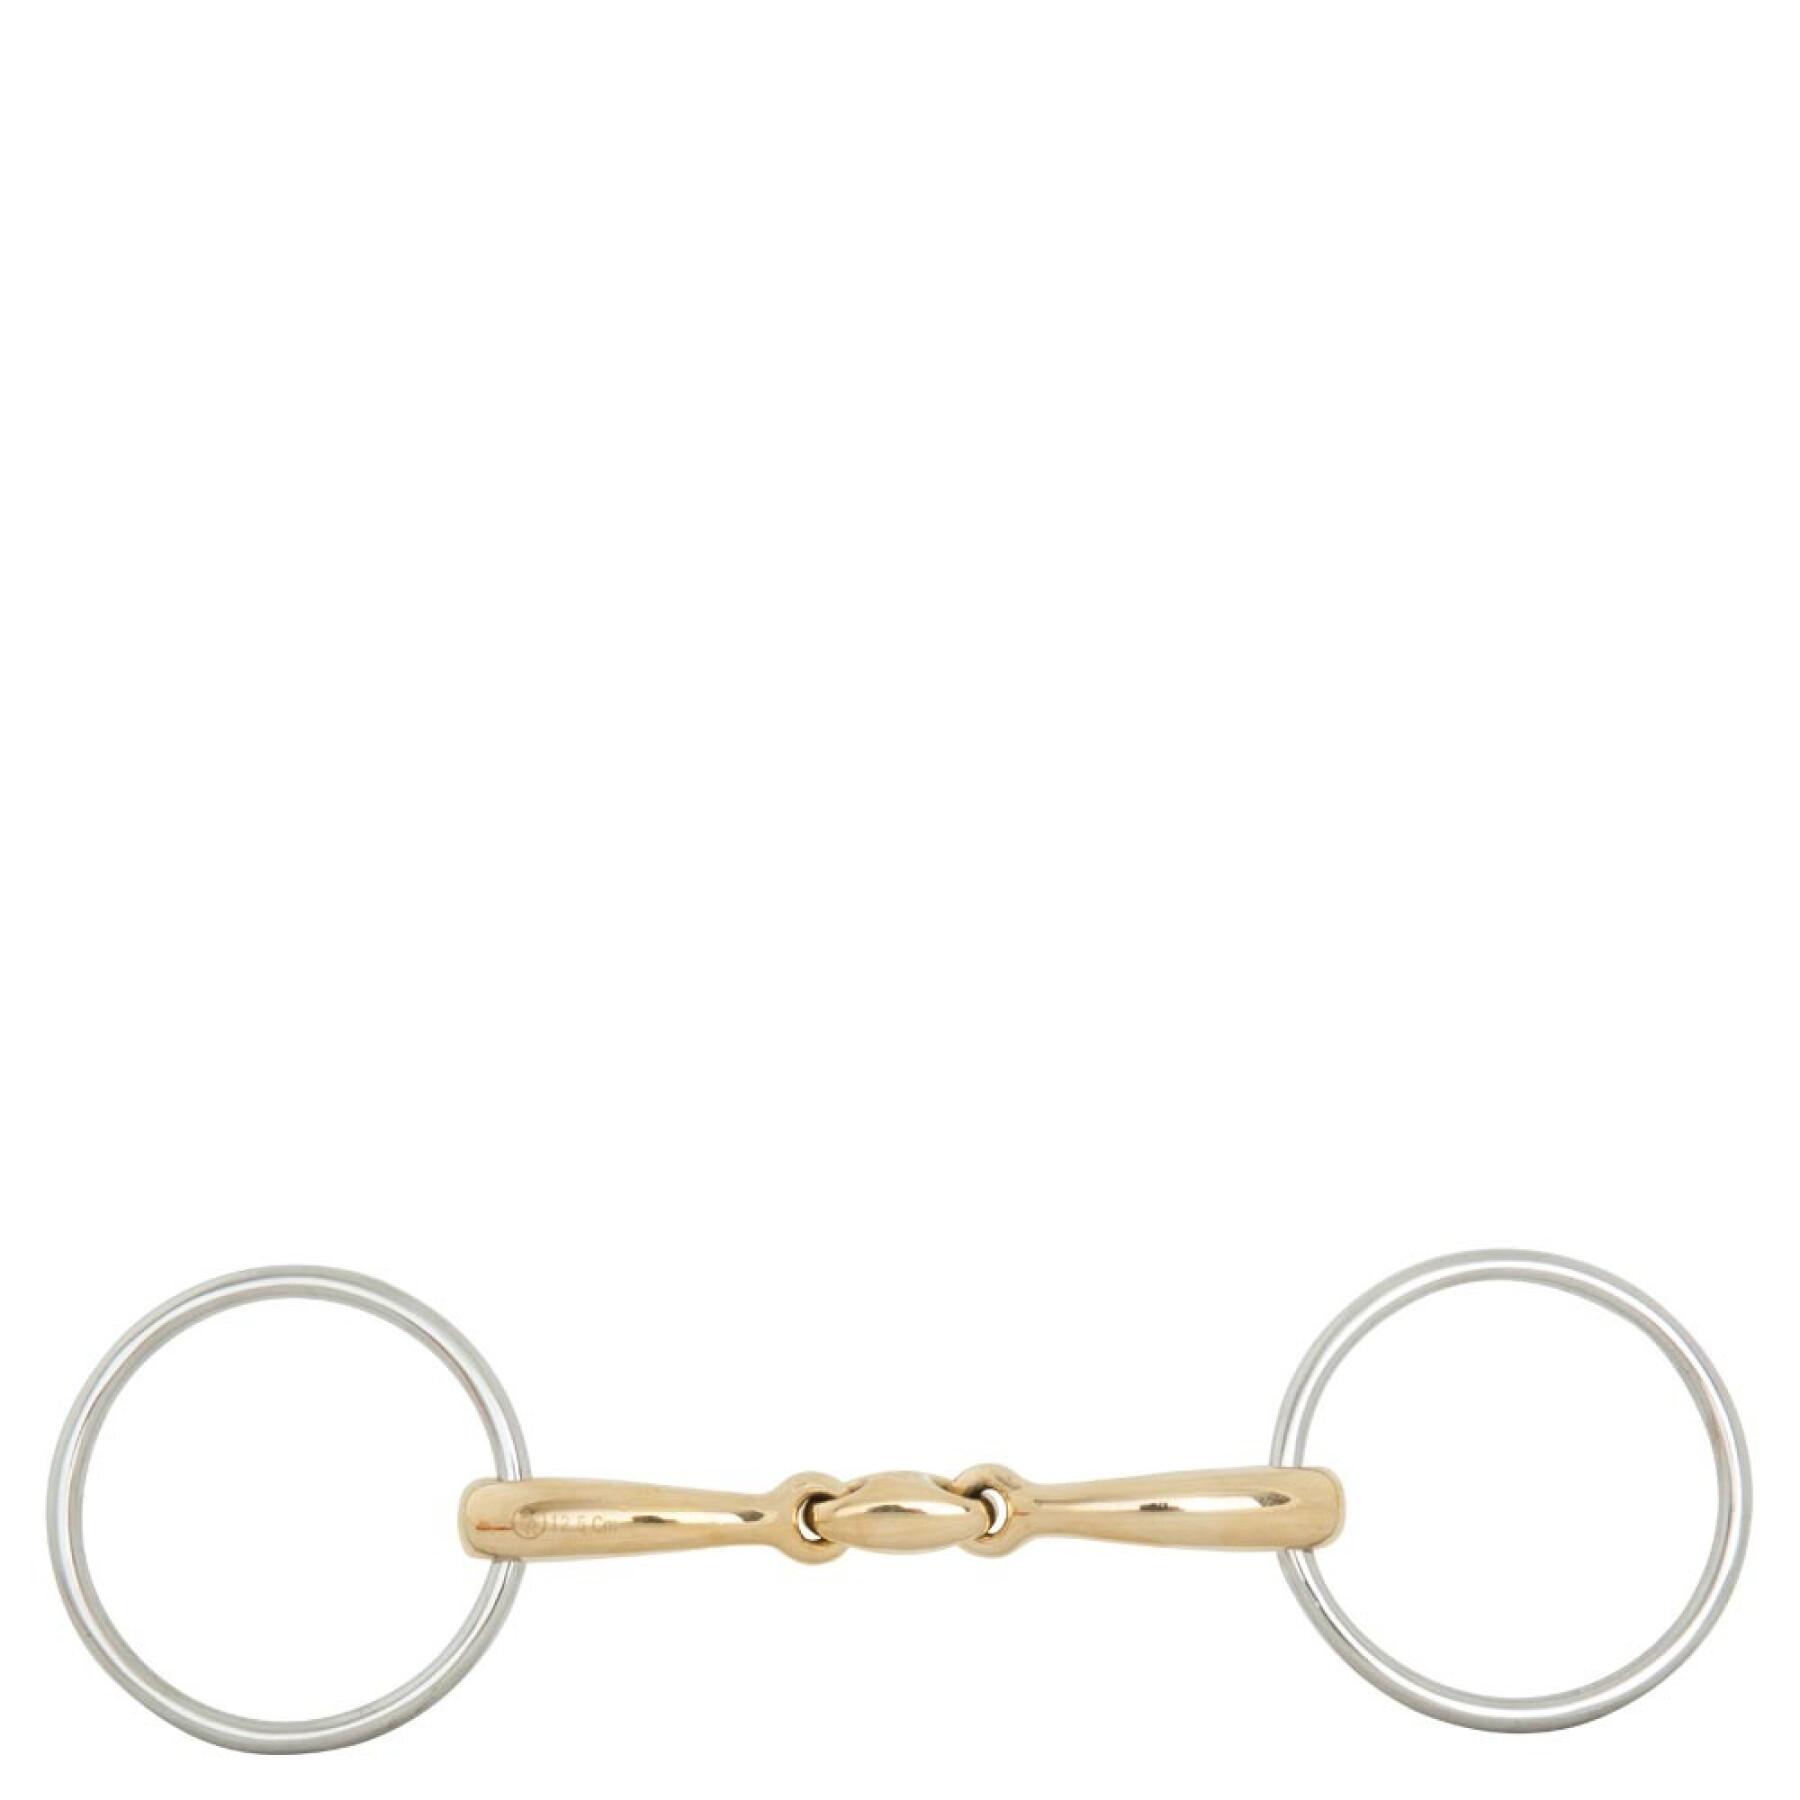 Double snaffle bits for horses BR Equitation Soft Contact